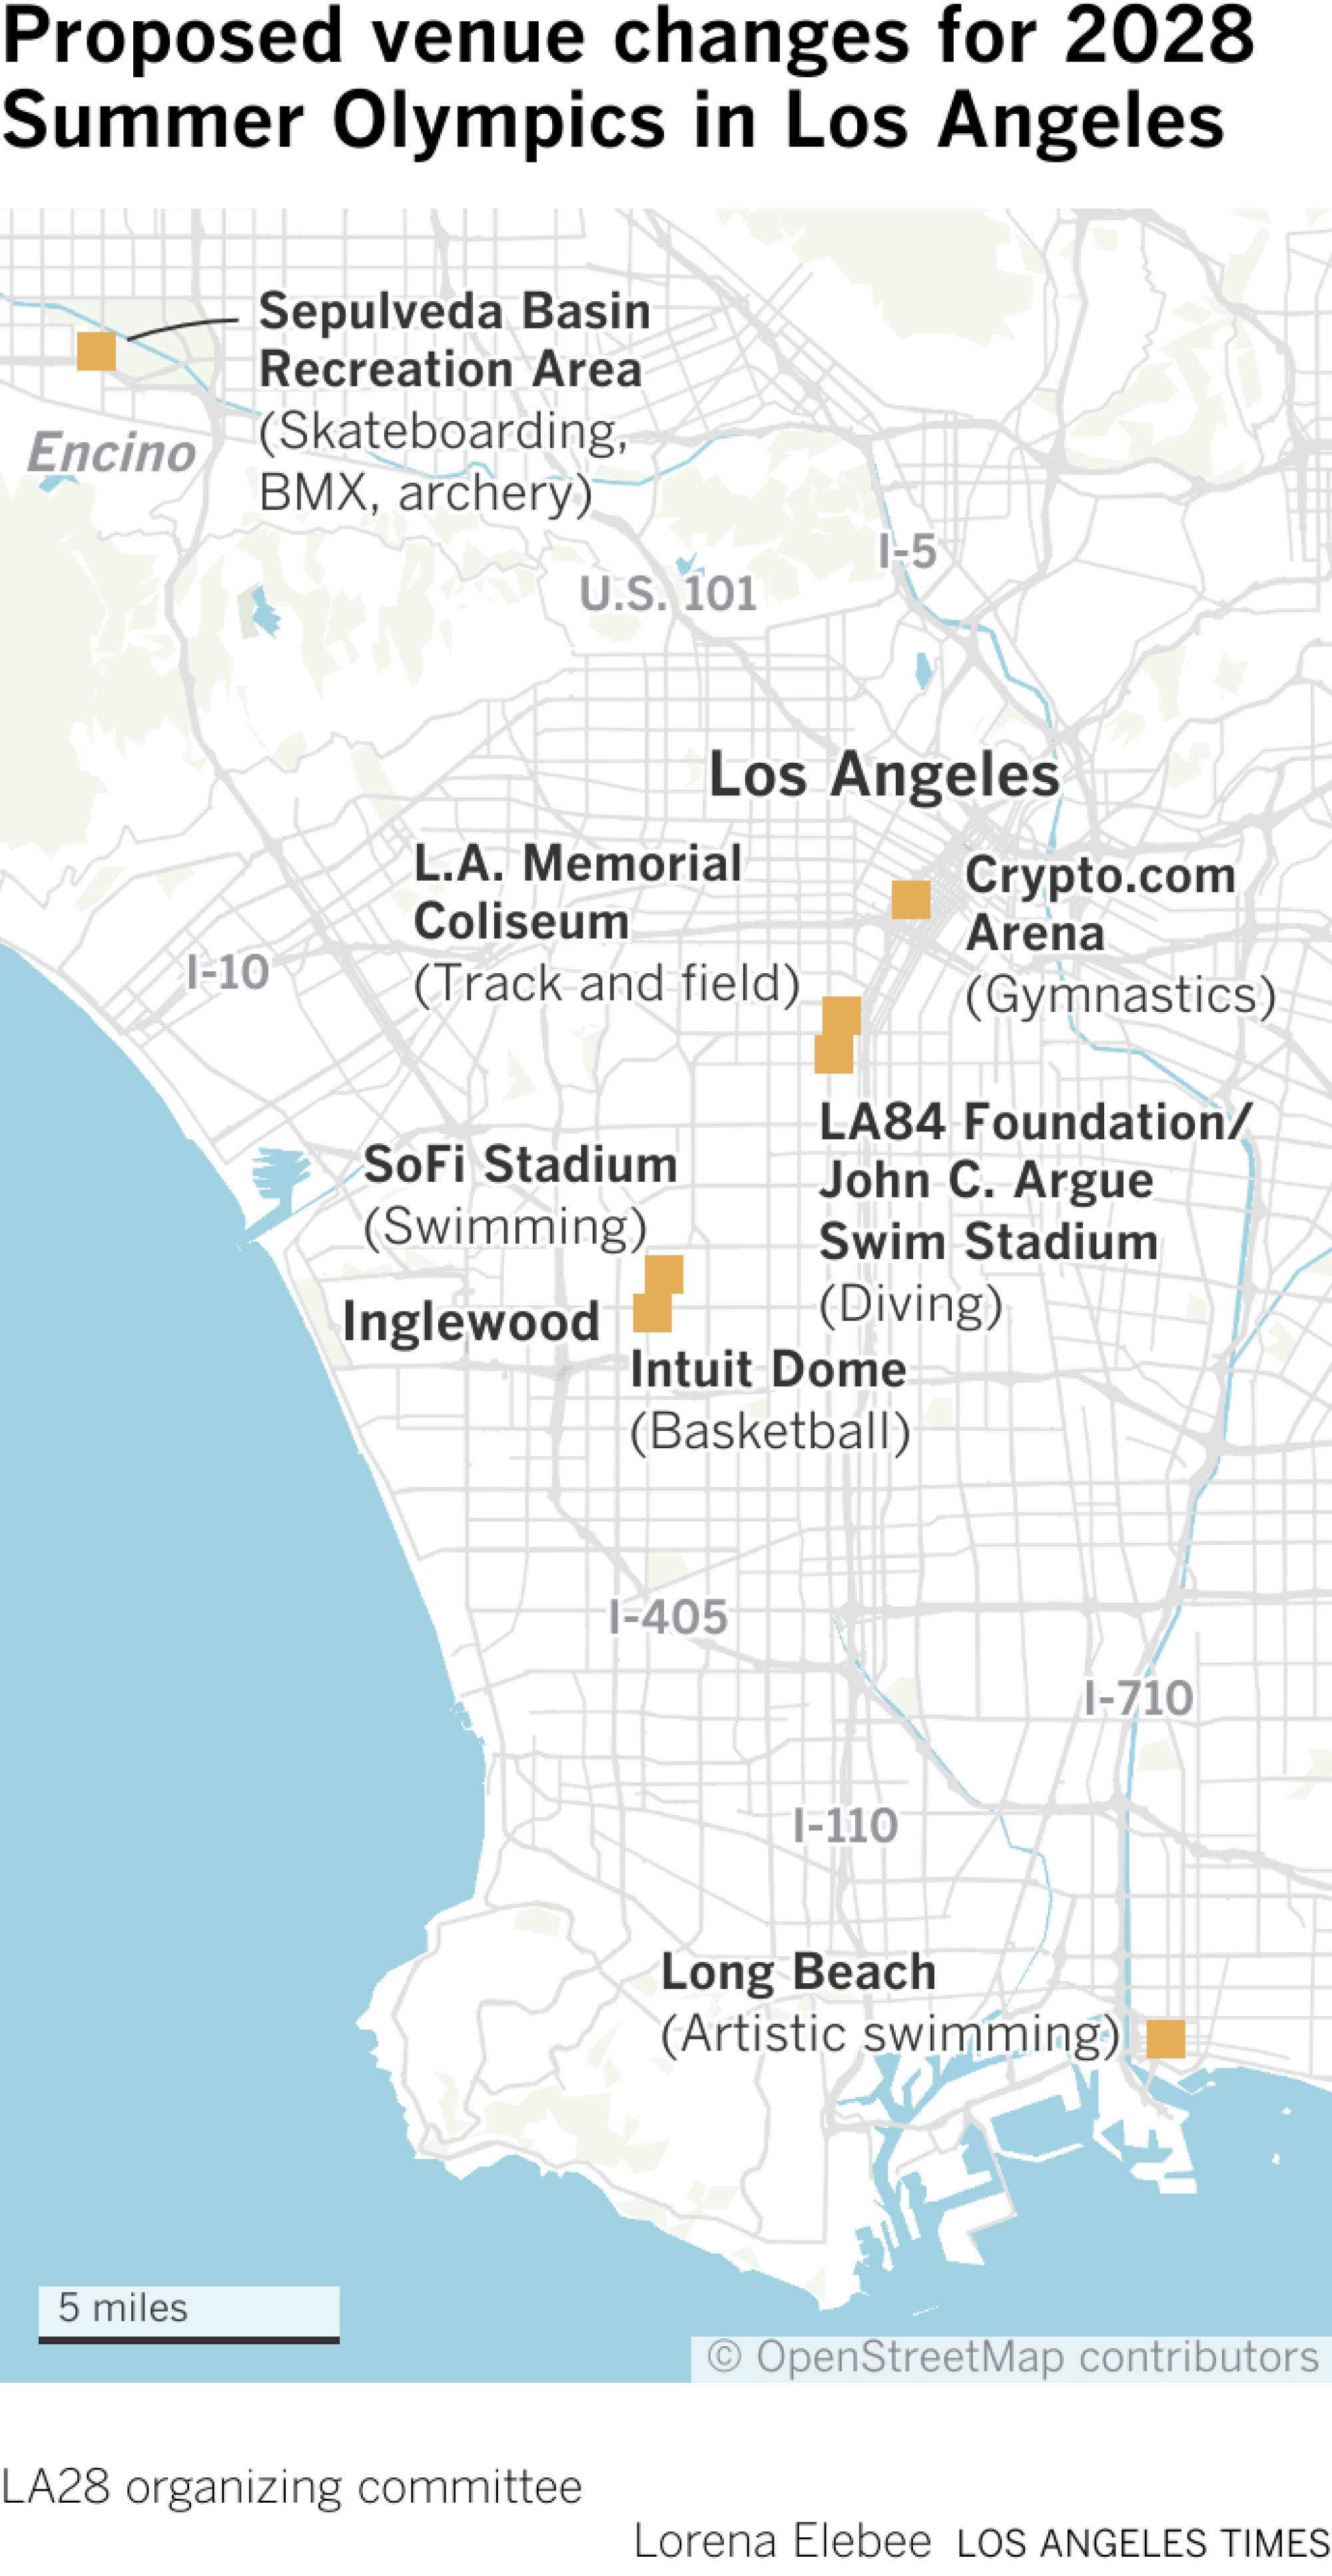 Map showing proposed venue changes for 2028 Summer Olympics in Los Angeles